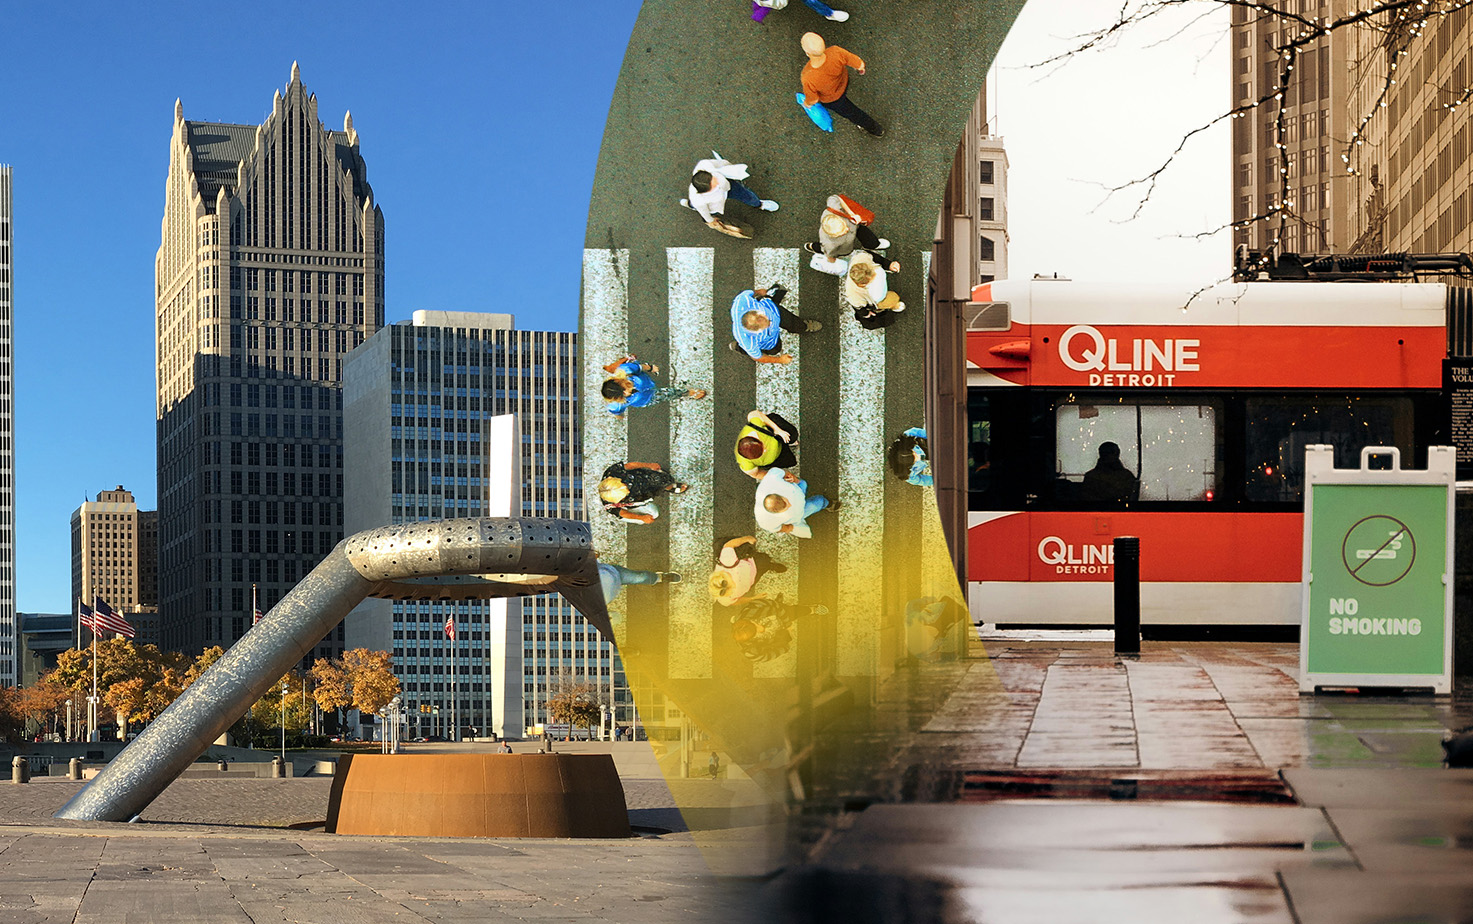 Combined image of the city of detroit, the q line detroit tram and pedestrians.